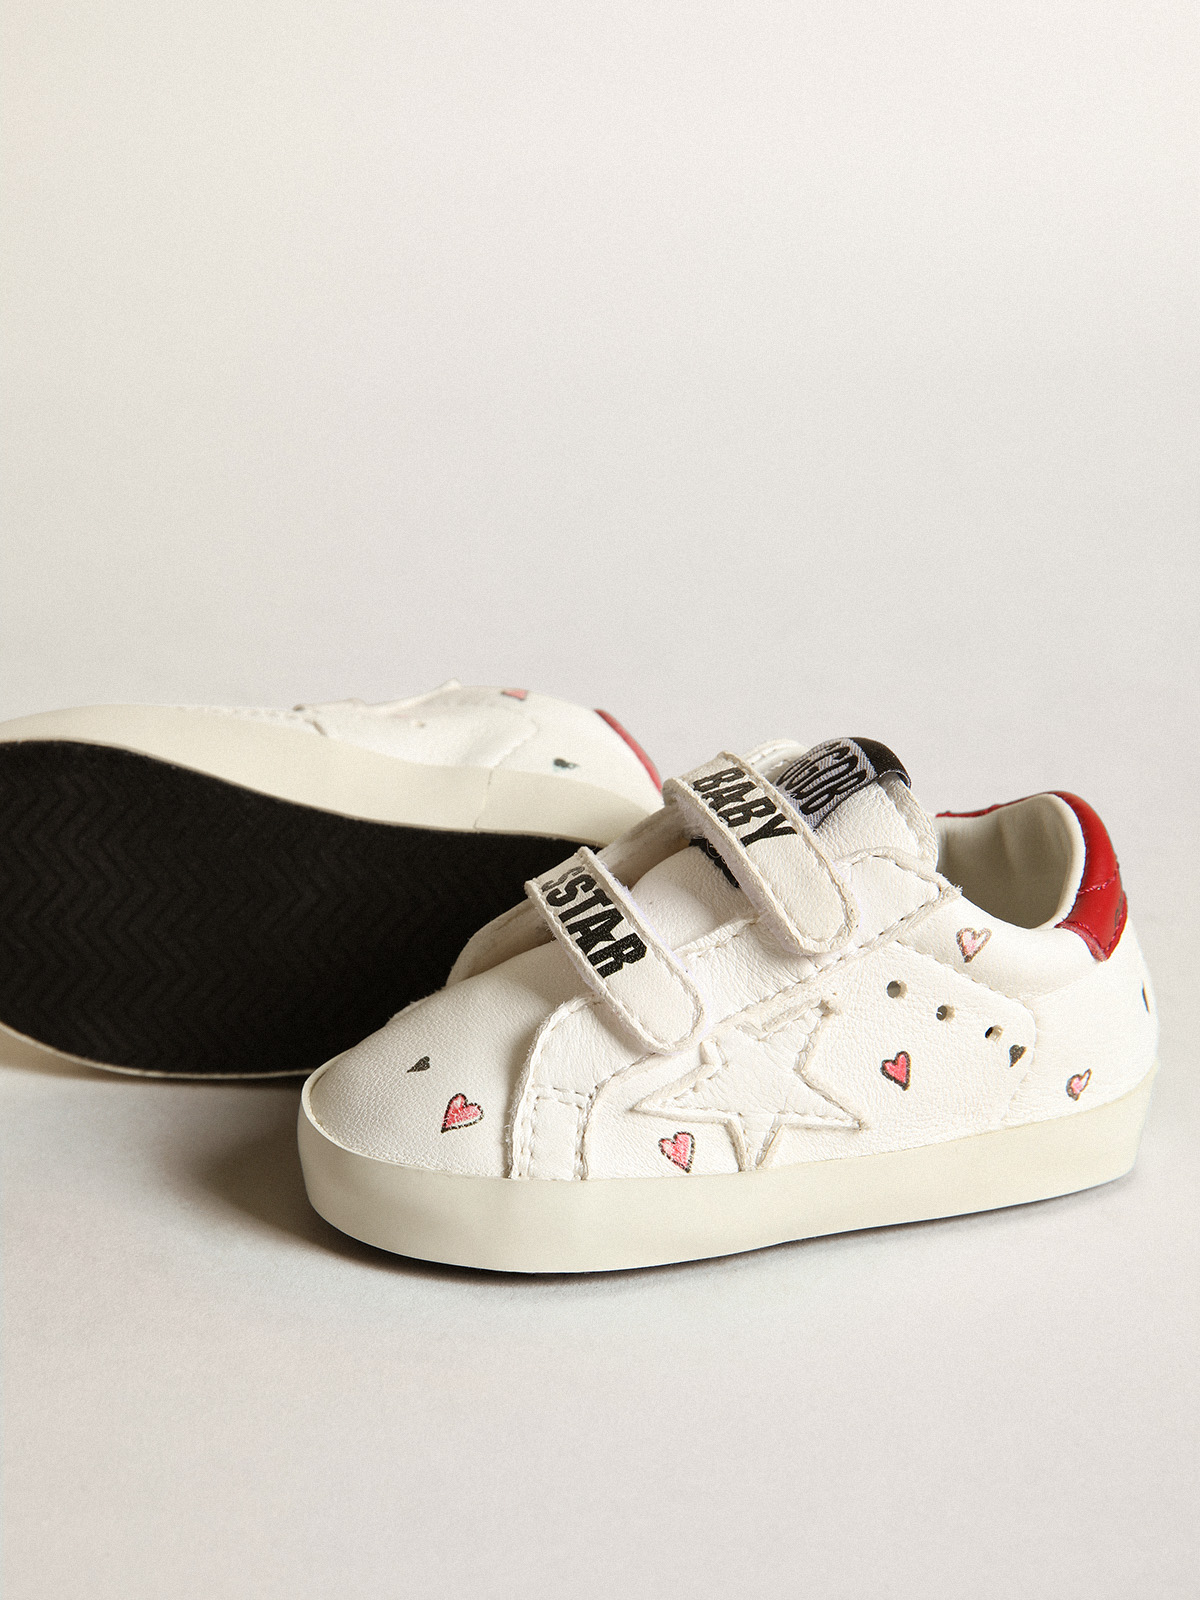 leder Borger international Baby School sneakers with white nappa leather star and red leather heel tab  | Golden Goose